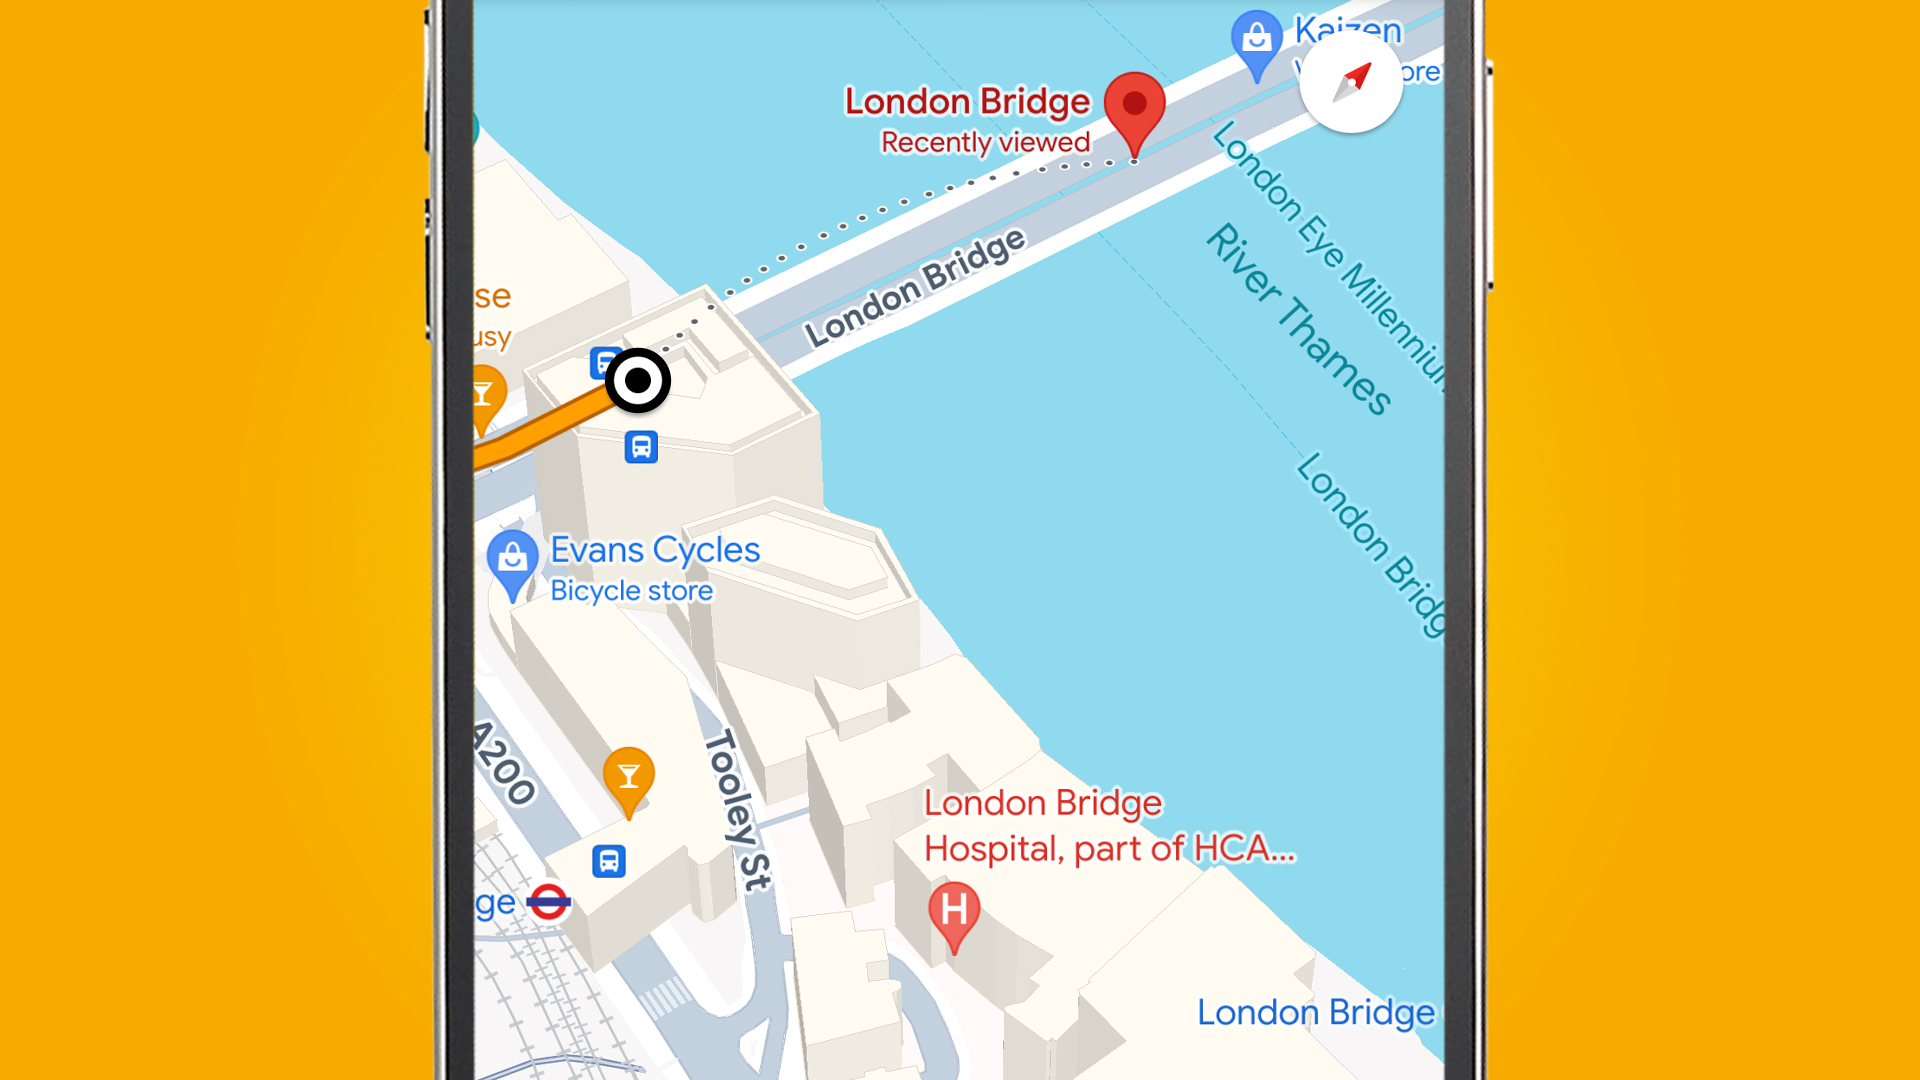 A phone on an orange background showing 3D buildings in the Google Maps app